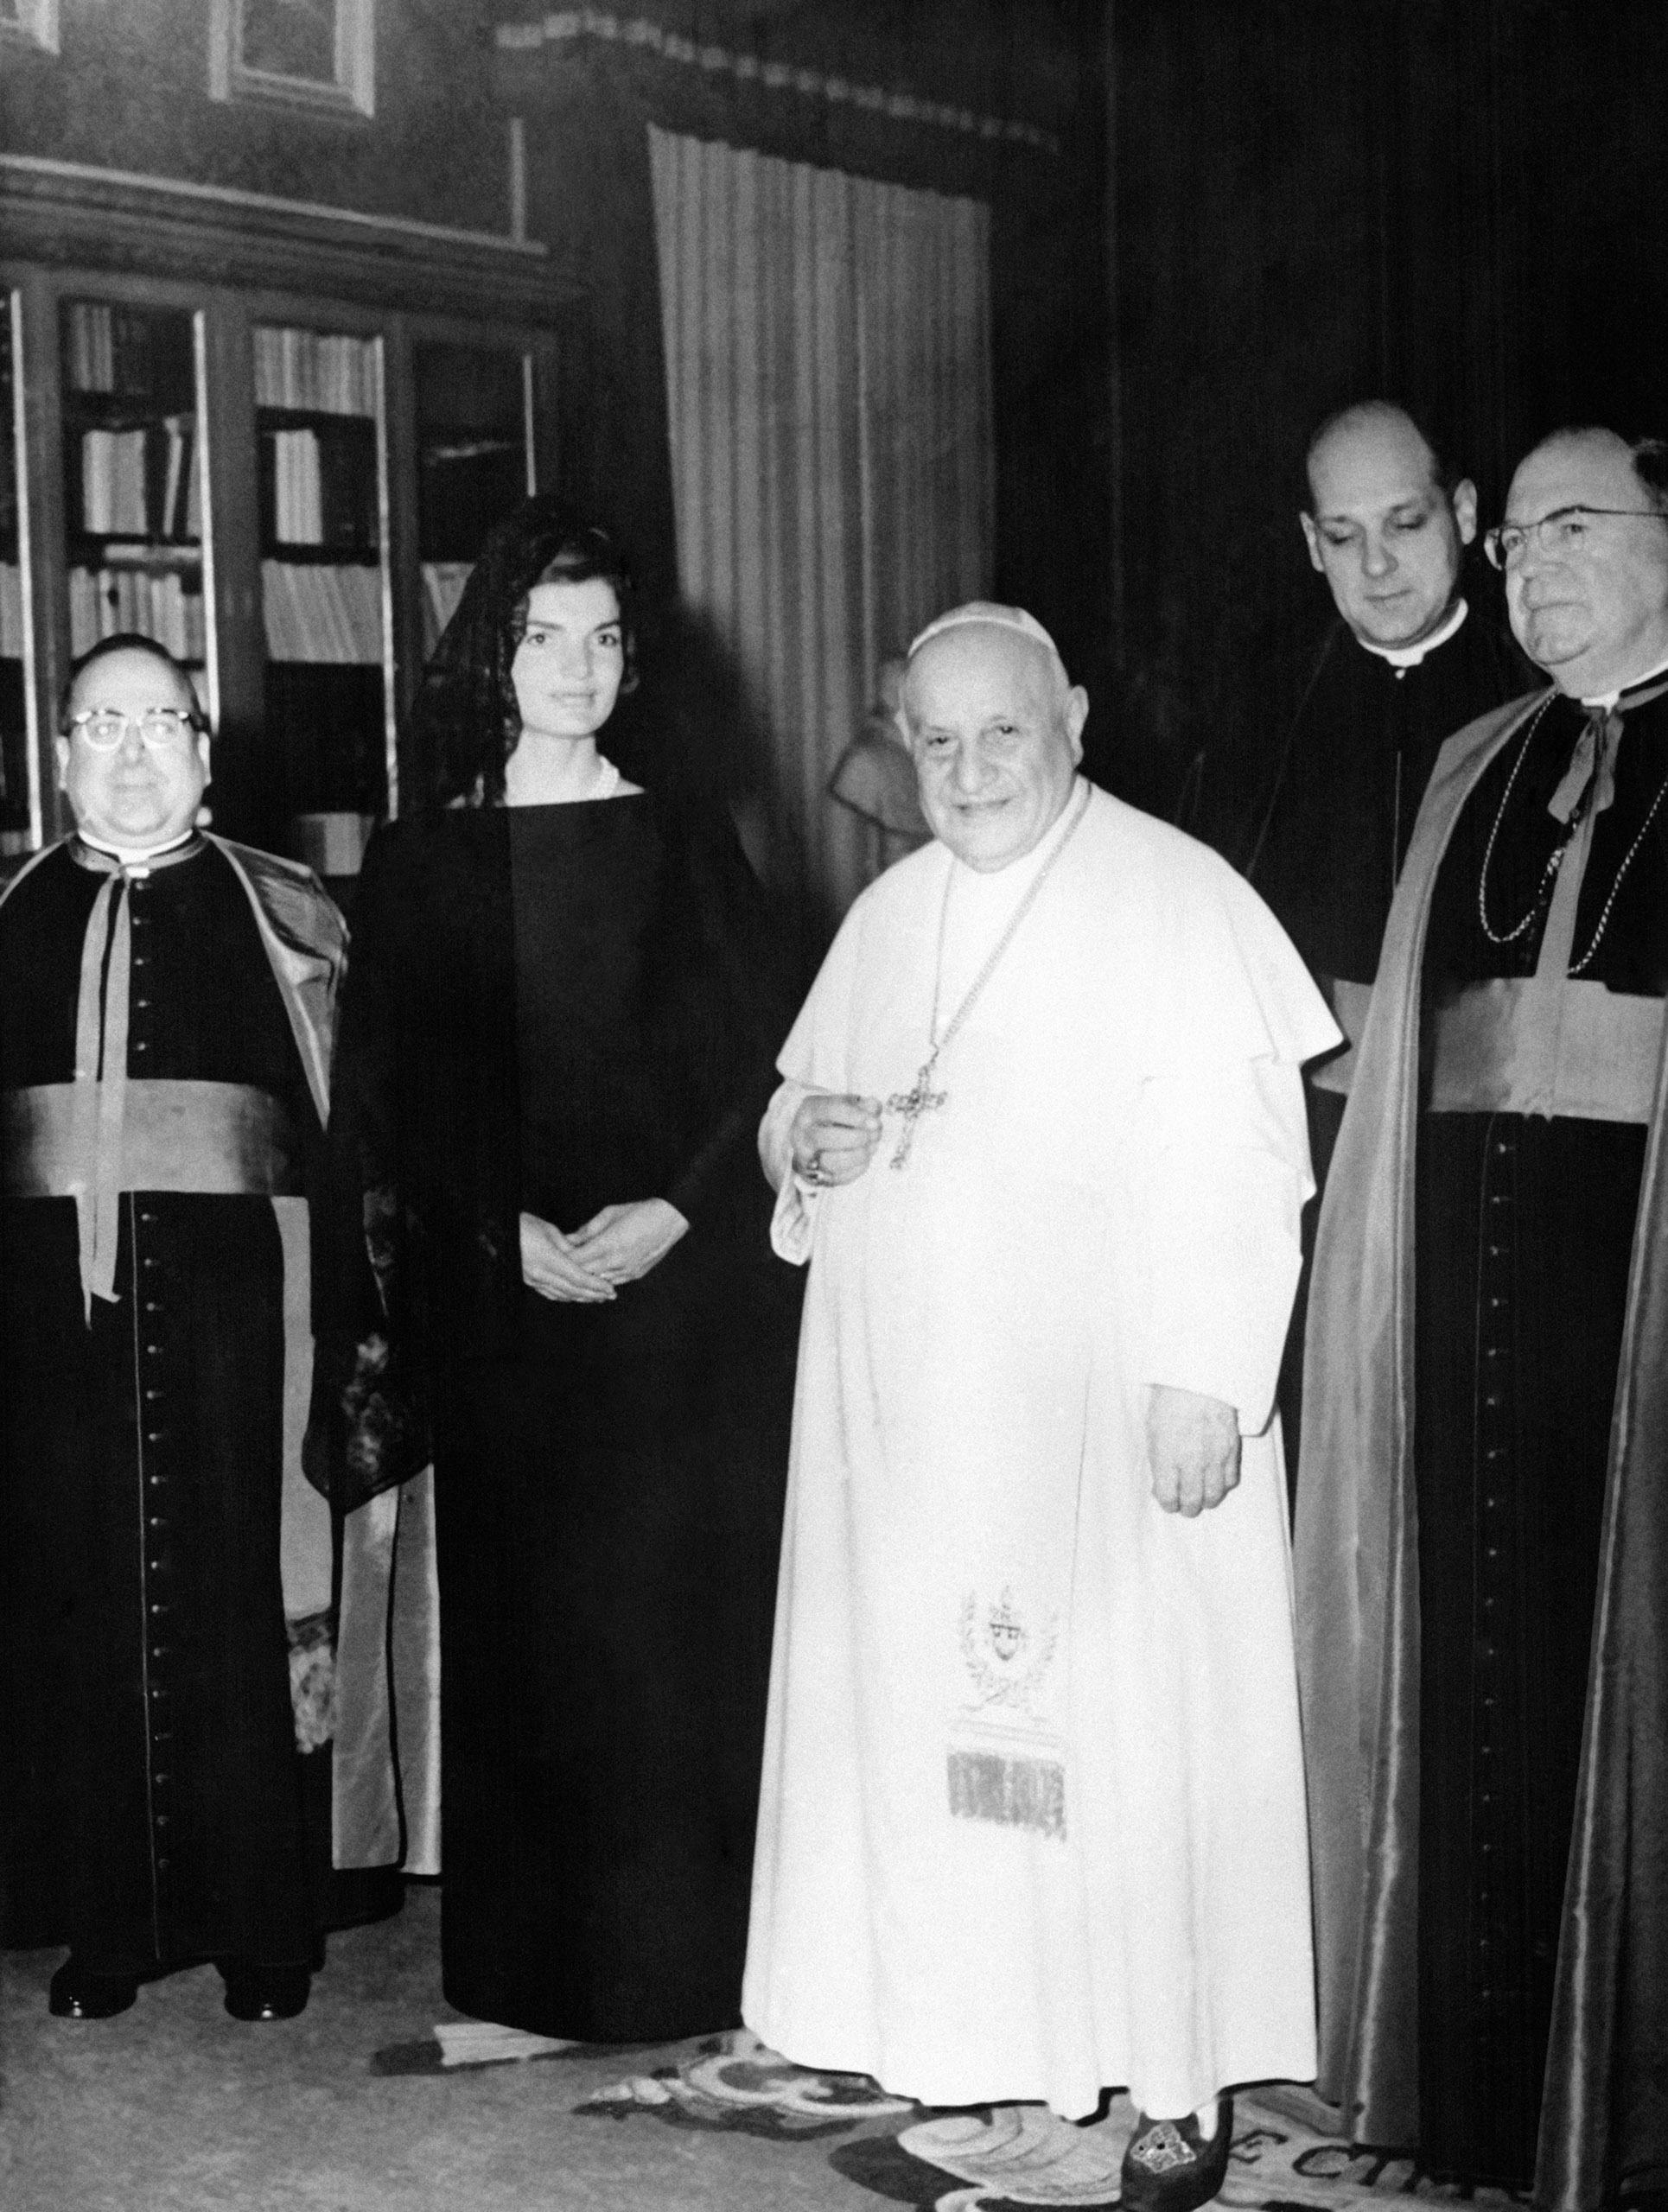 Jacqueline Kennedy stands next to Pope John XXIII during an audience in the Pontiff's private library in the Vatican, Italy, March 11, 1962. (Keystone-France/Gamma-Keystone /Getty Images)